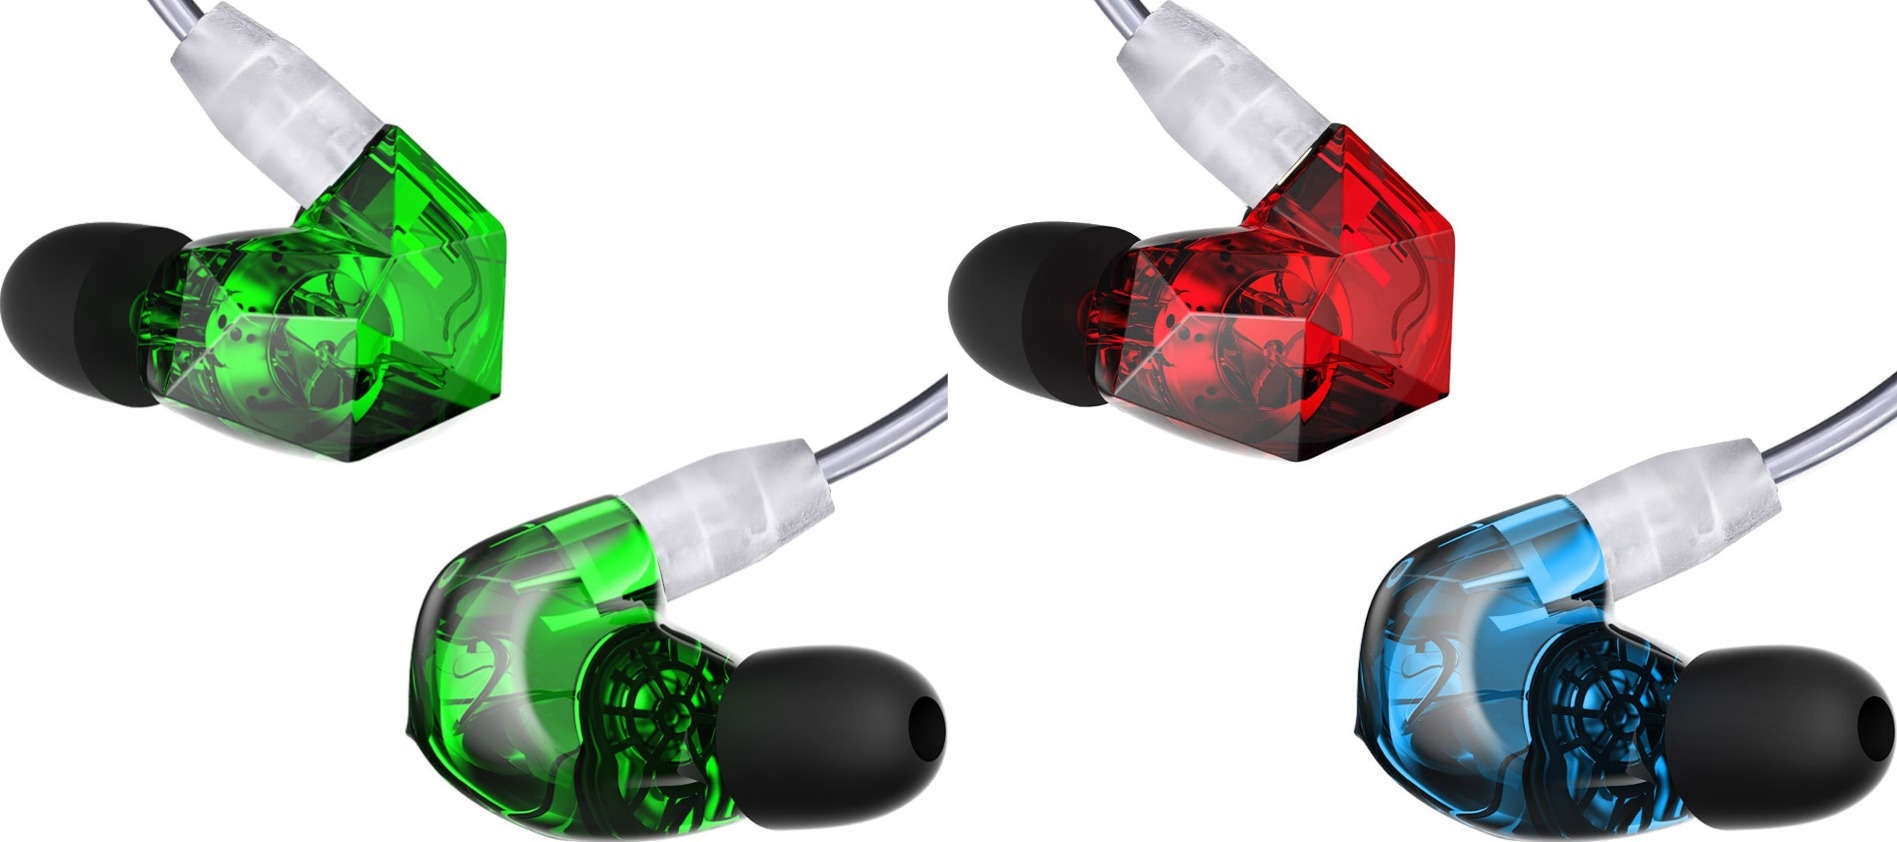 Buy VSONIC VSD3 Earphone at HiFiNage in India with warranty.